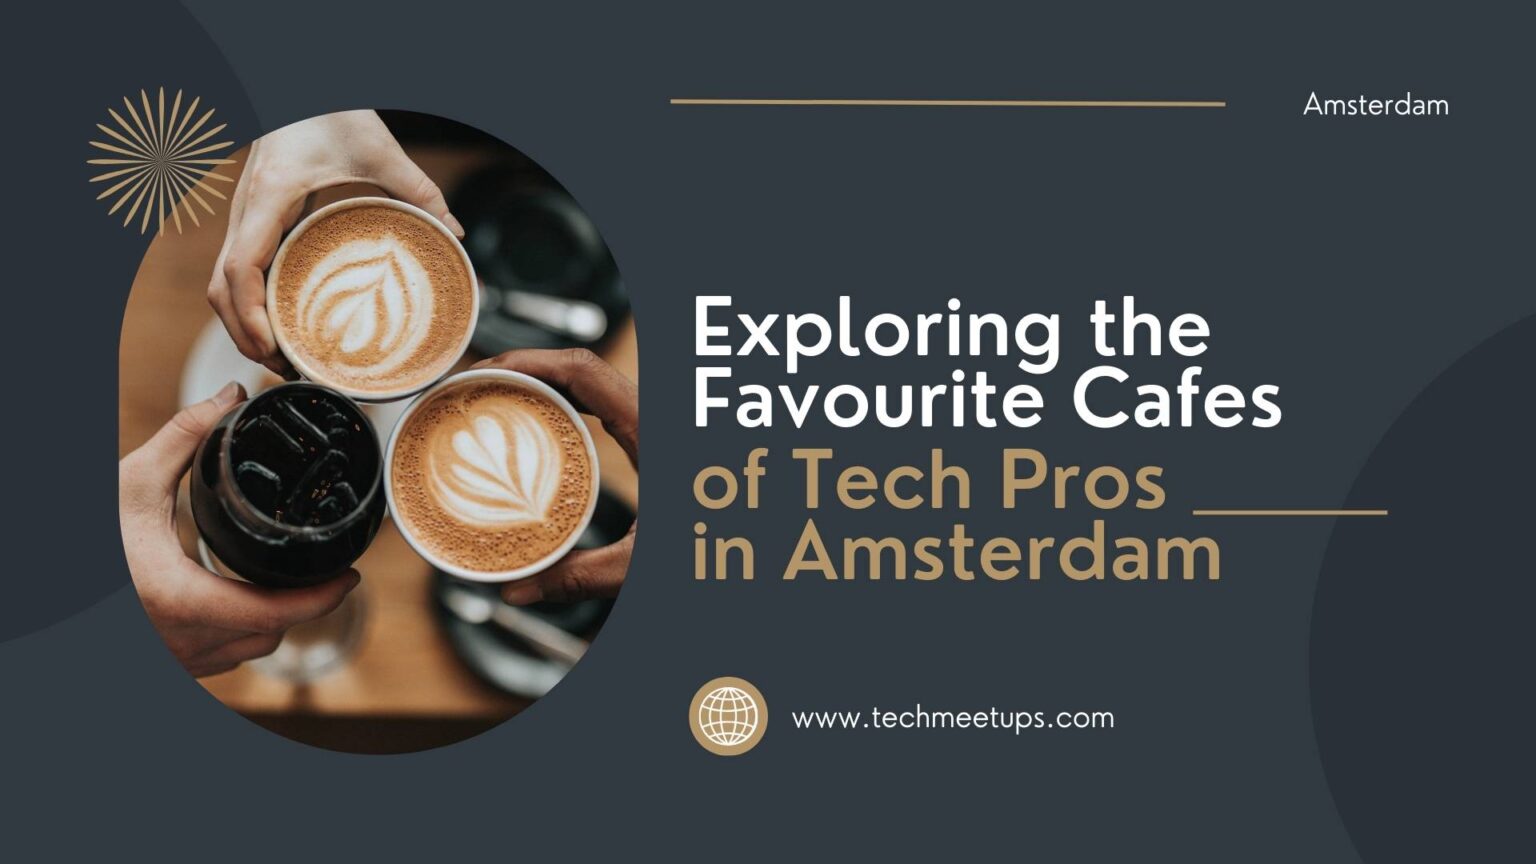 Exploring the Favourite Cafes of Tech Pros in Amsterdam